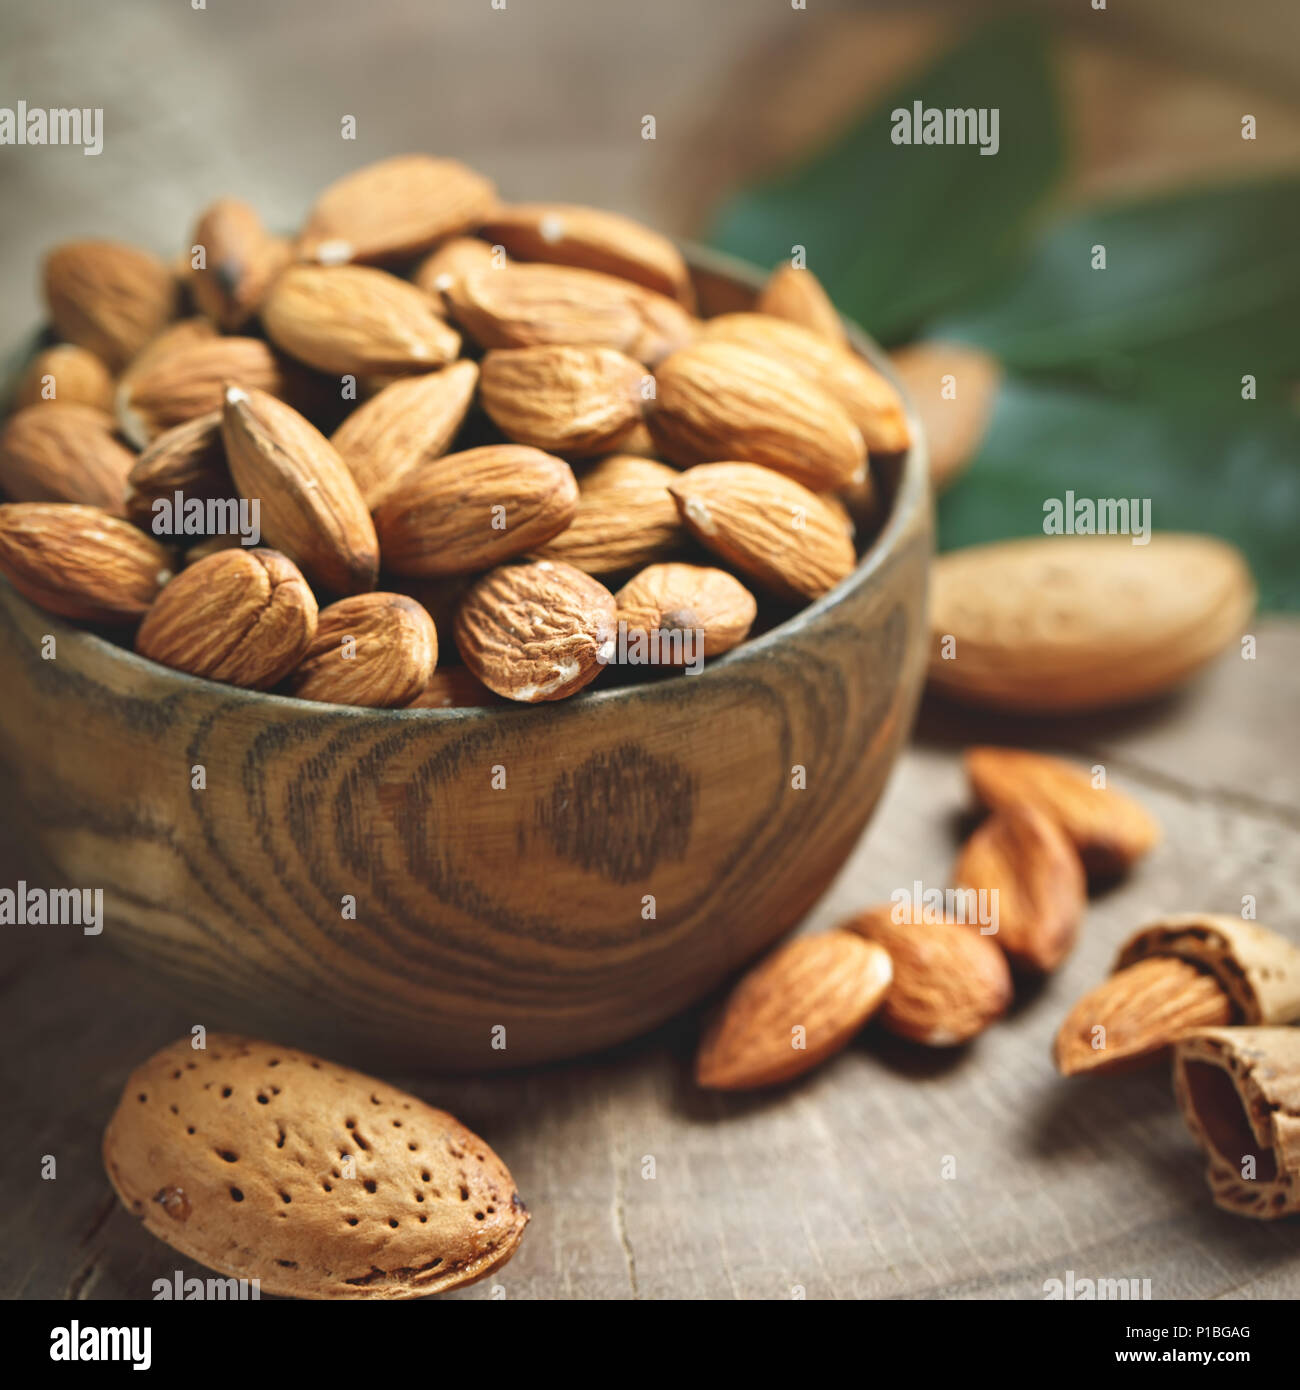 Almond on a wooden table in the summer garden. Useful food. Stock Photo